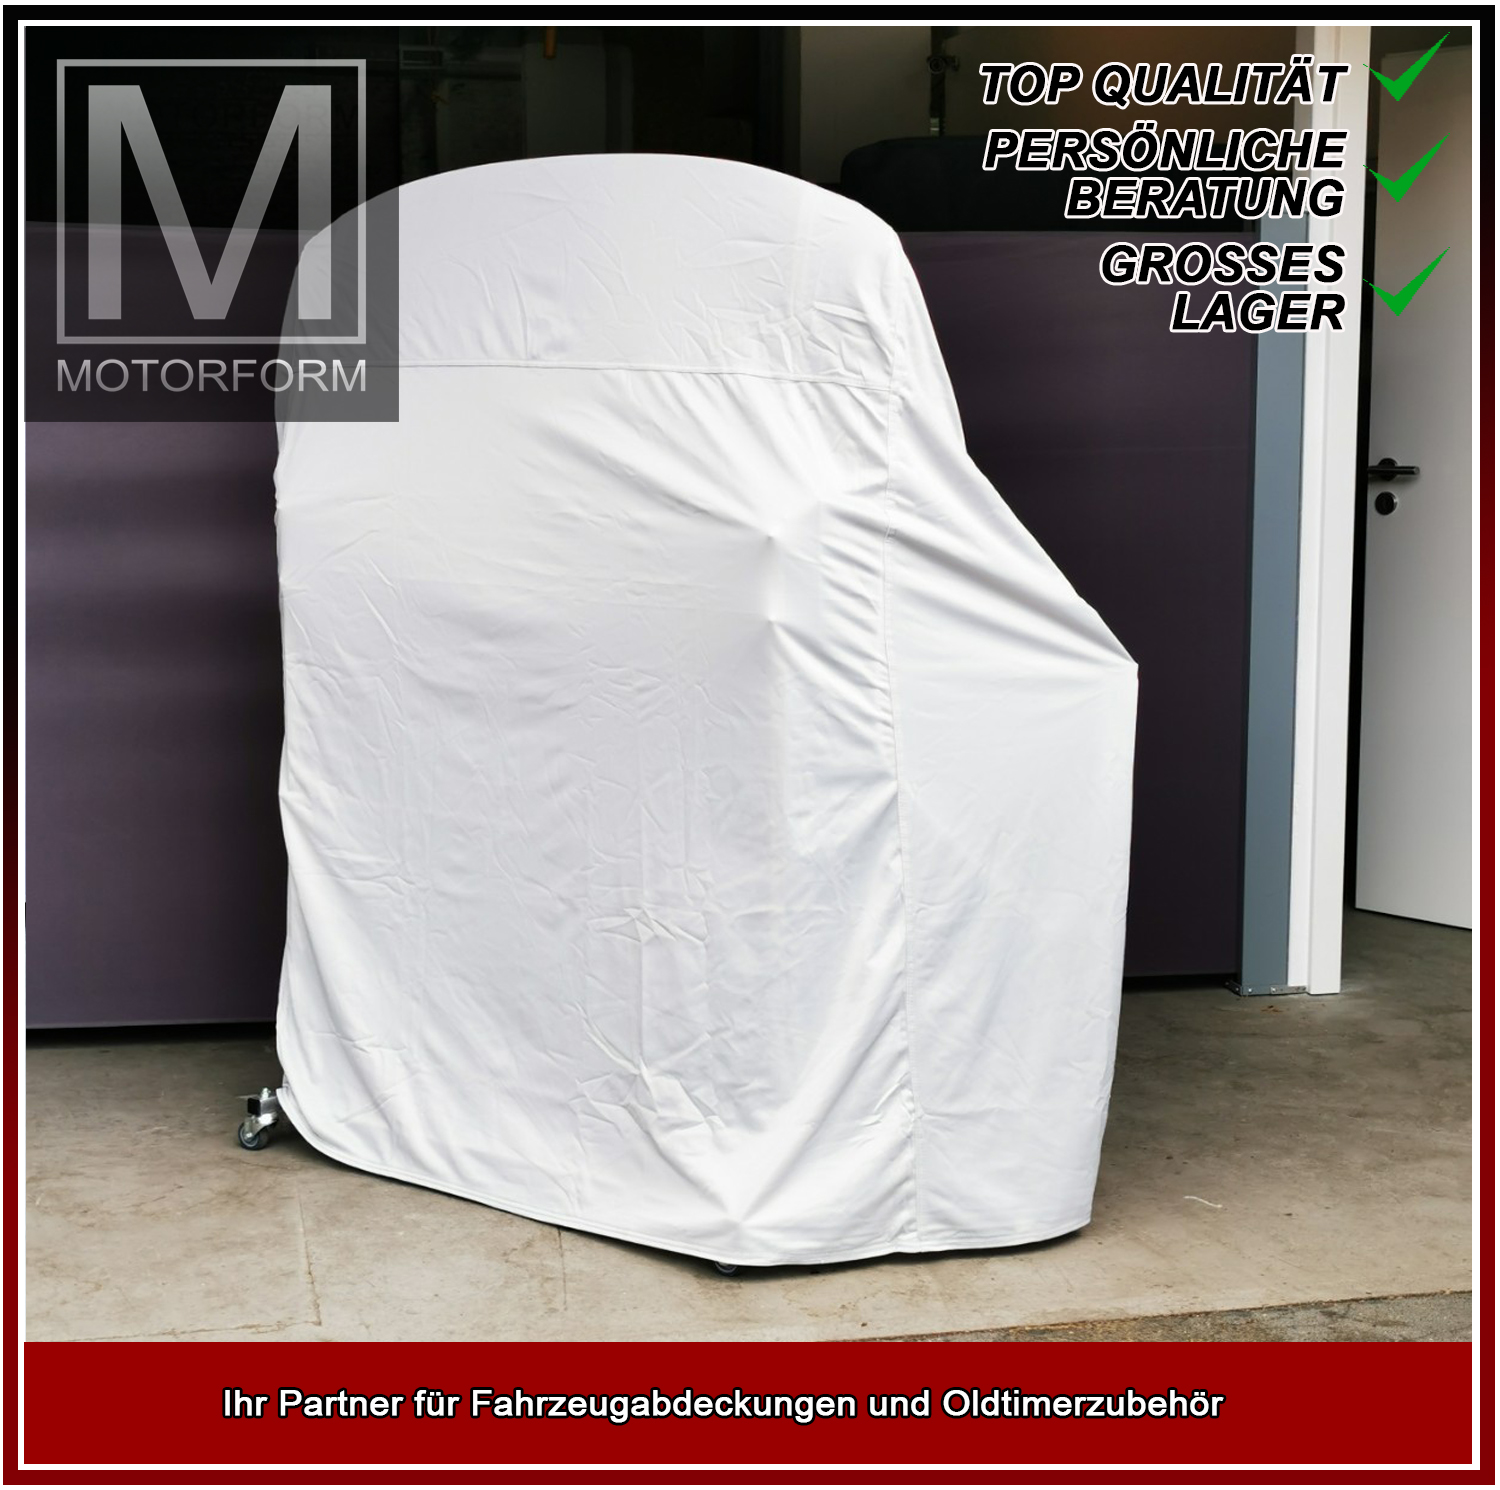 Silver Series Hardtop-Cover for Hardtop-Cover BMW Z8